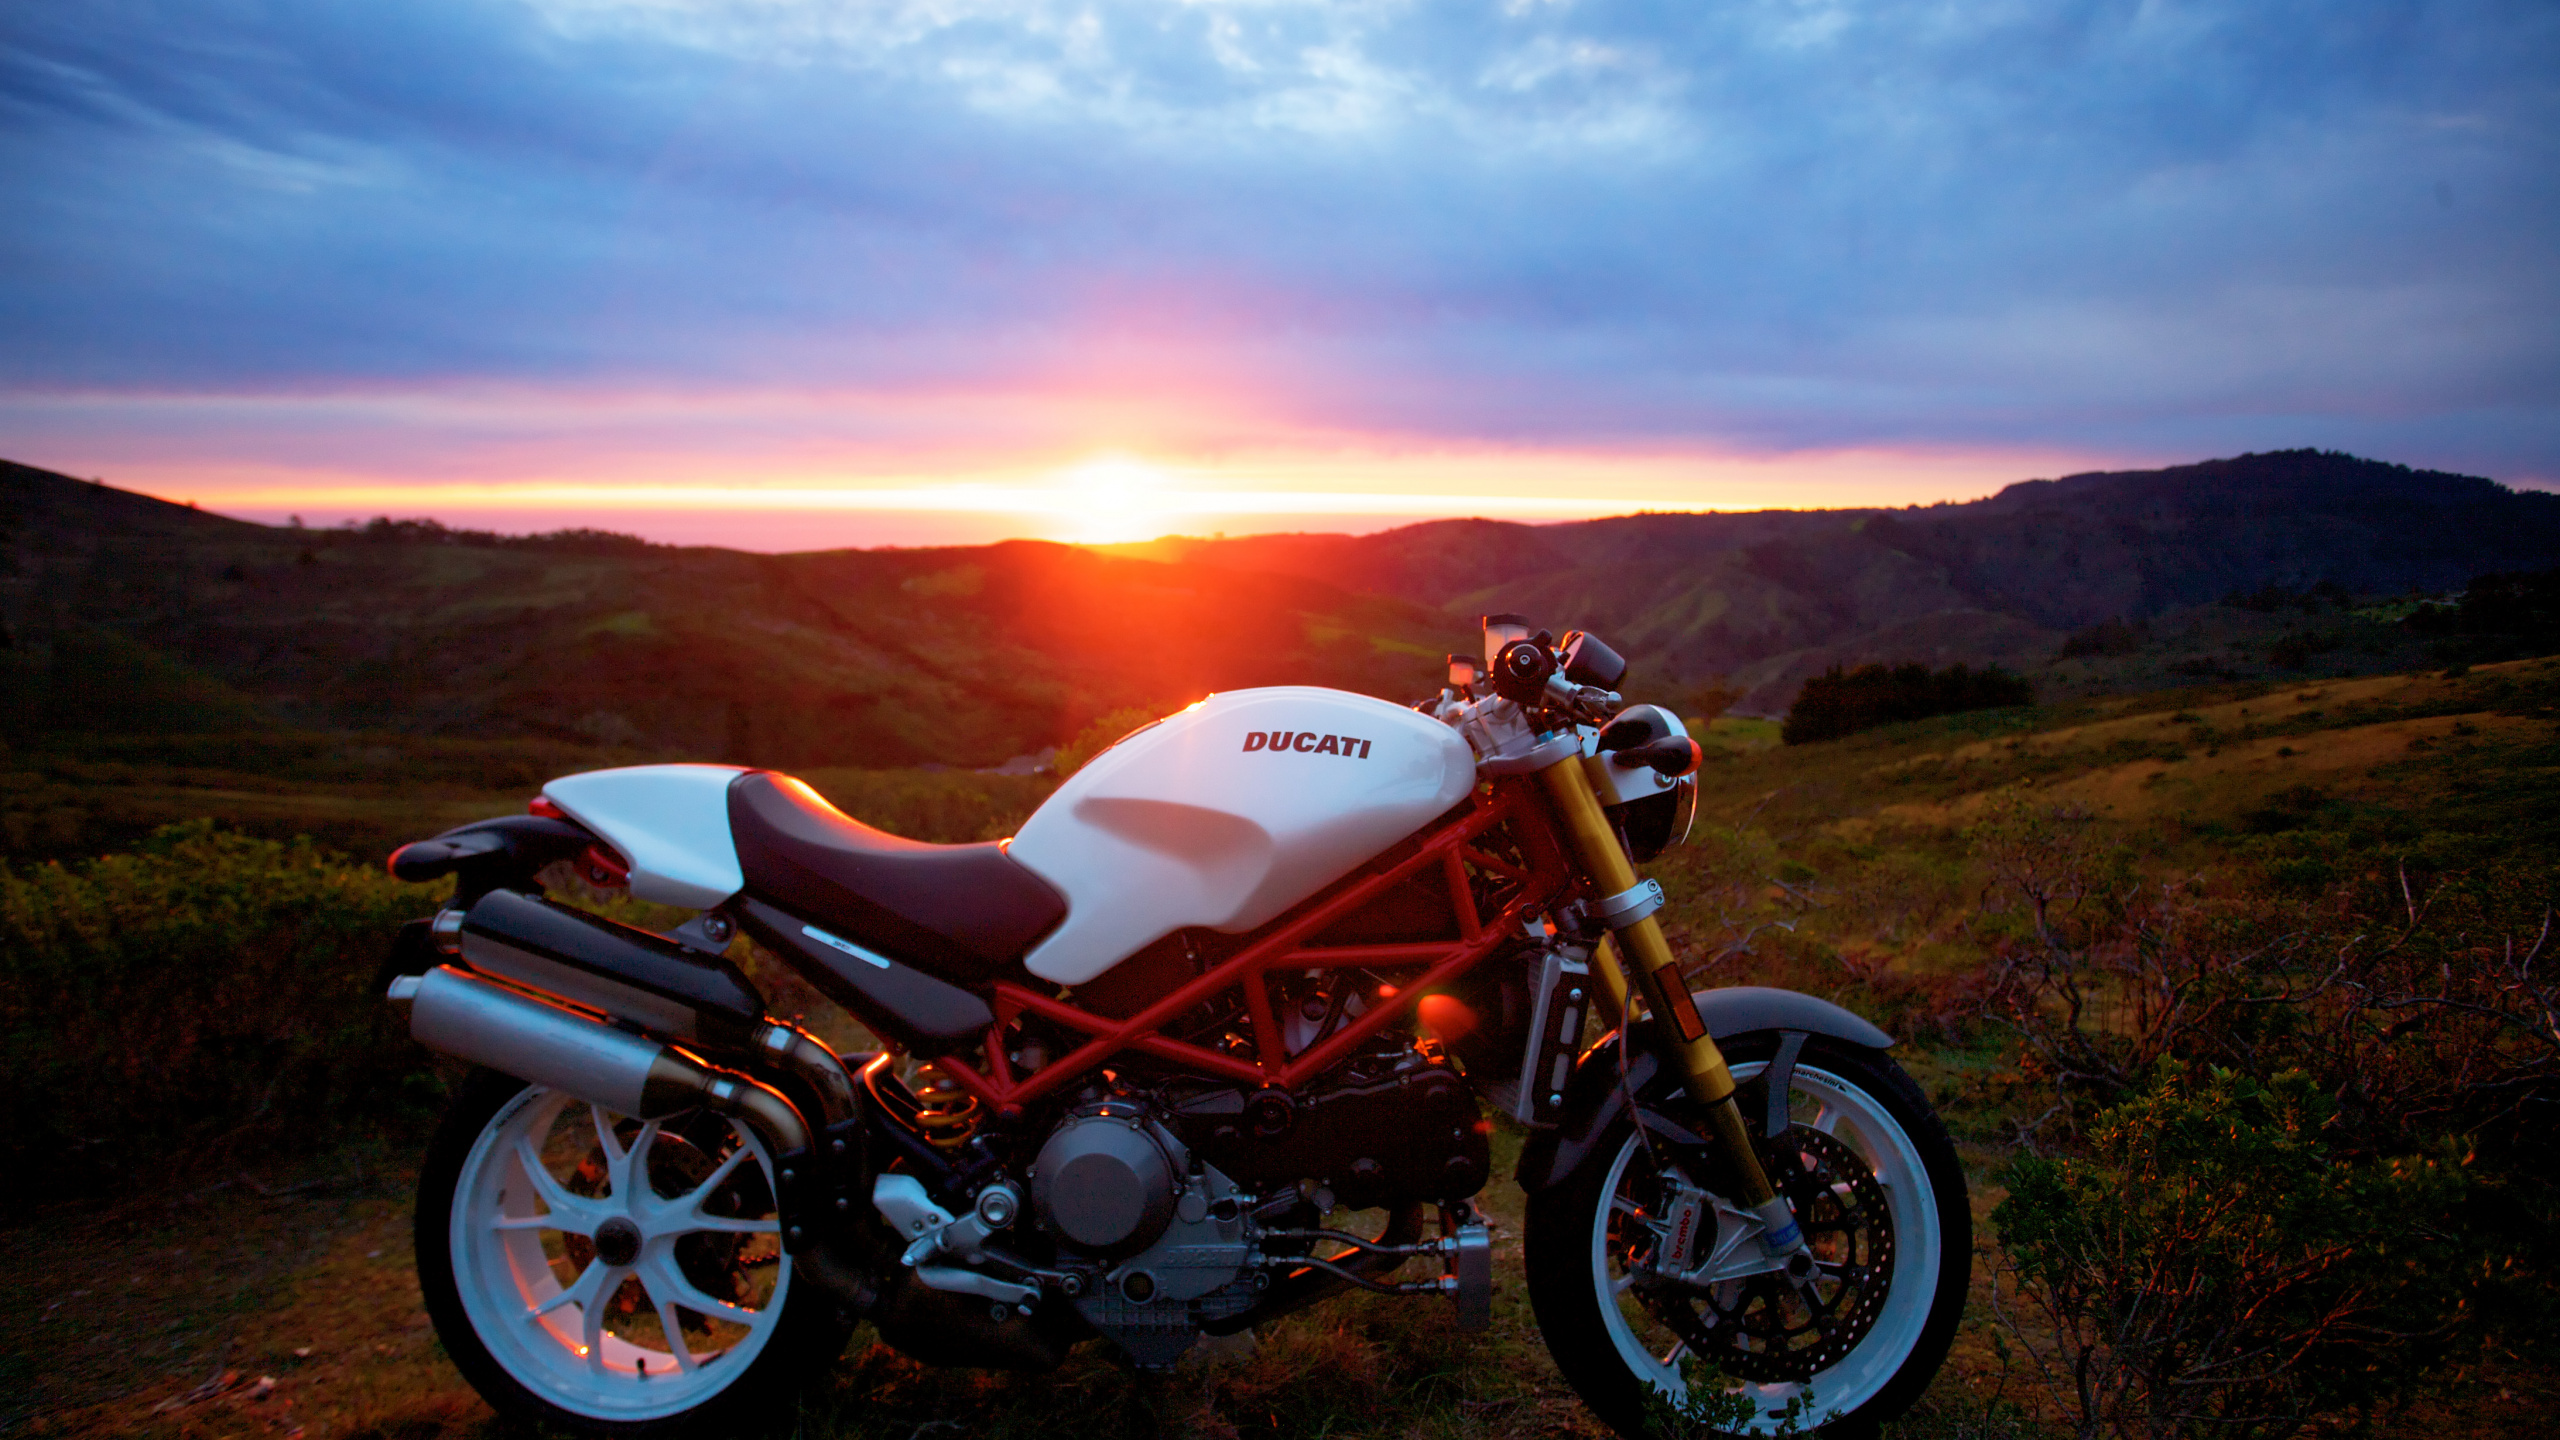 White and Black Cruiser Motorcycle on Green Grass Field During Sunset. Wallpaper in 2560x1440 Resolution